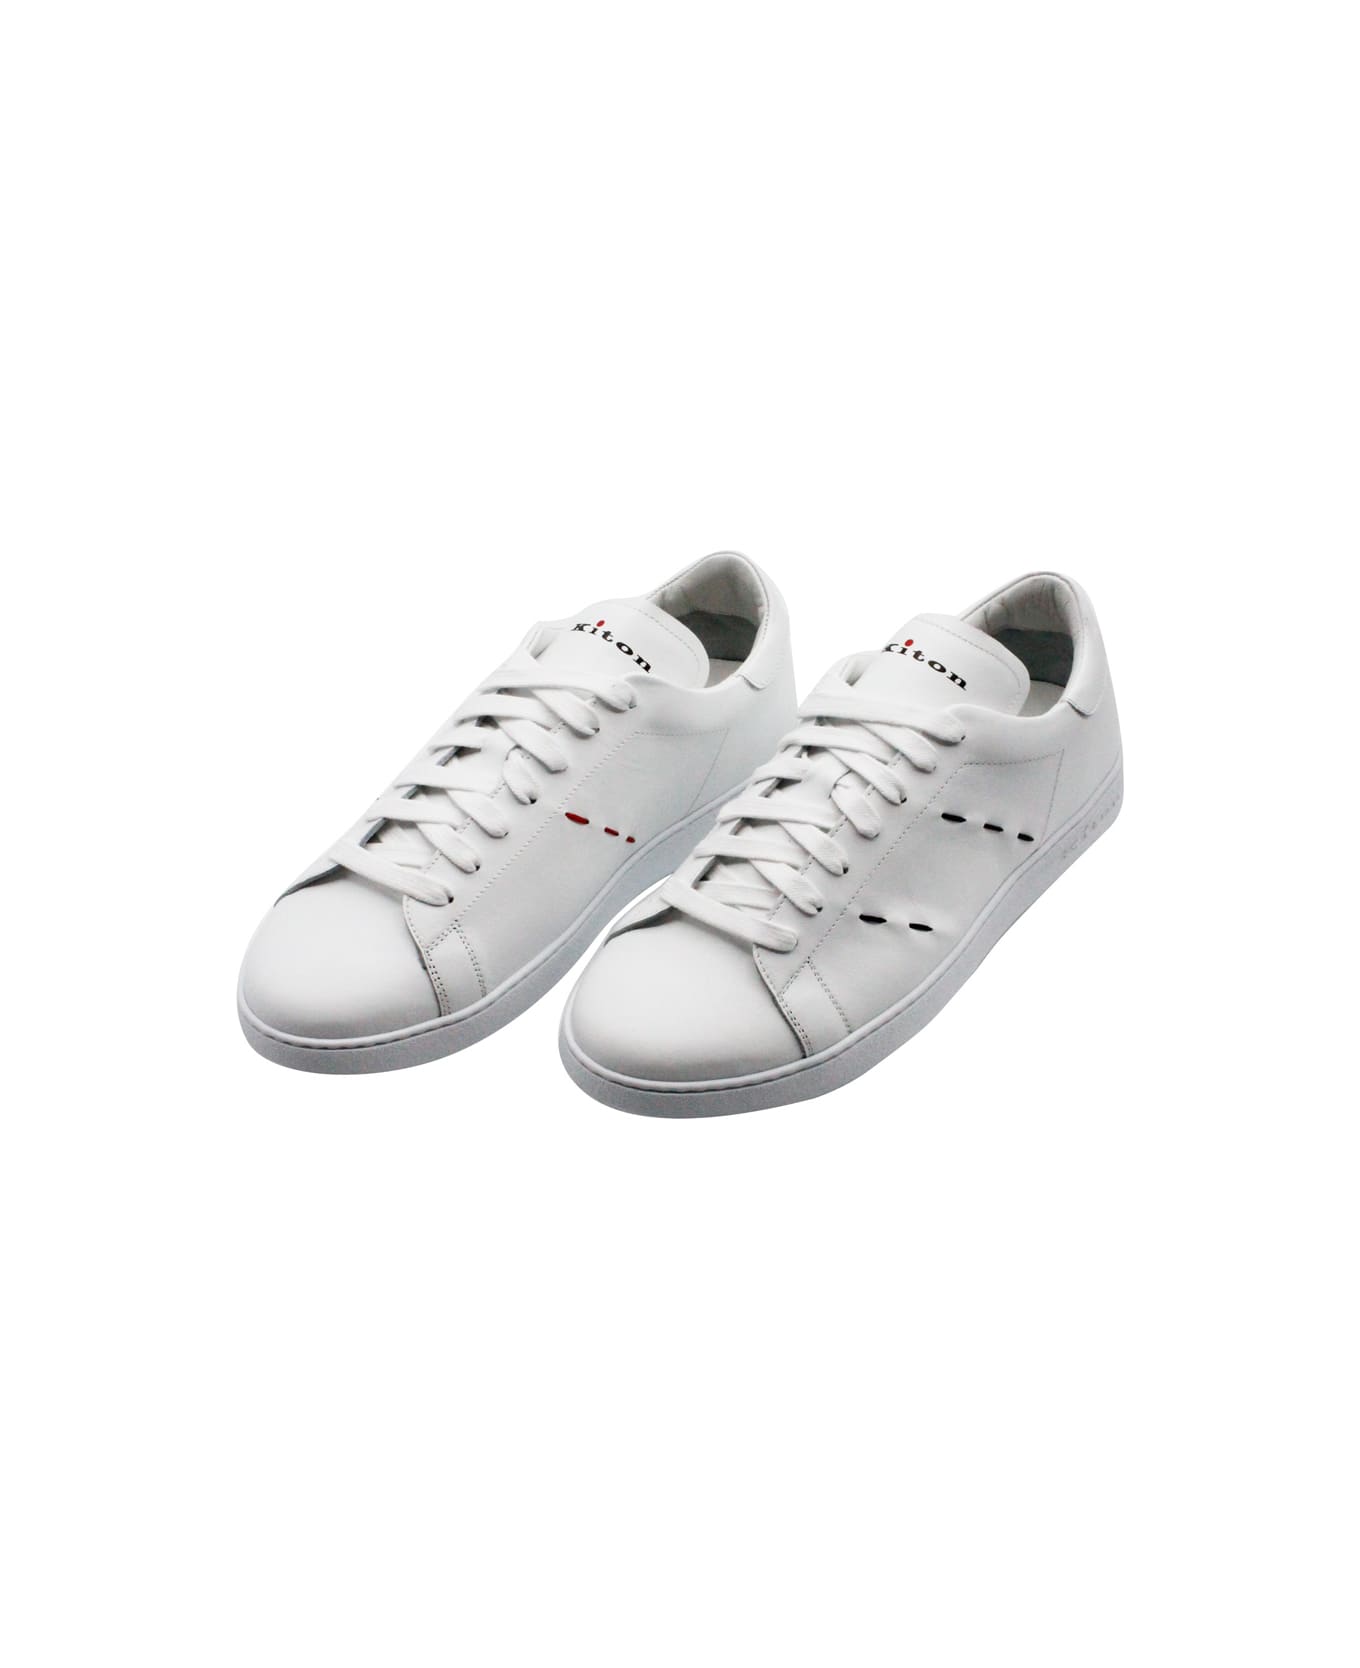 Kiton Lightweight Sneaker Shoe In Soft Leather With Contrasting Color Finishes And Stitching. Tongue With Logo Print And Lace Closure. - White スニーカー